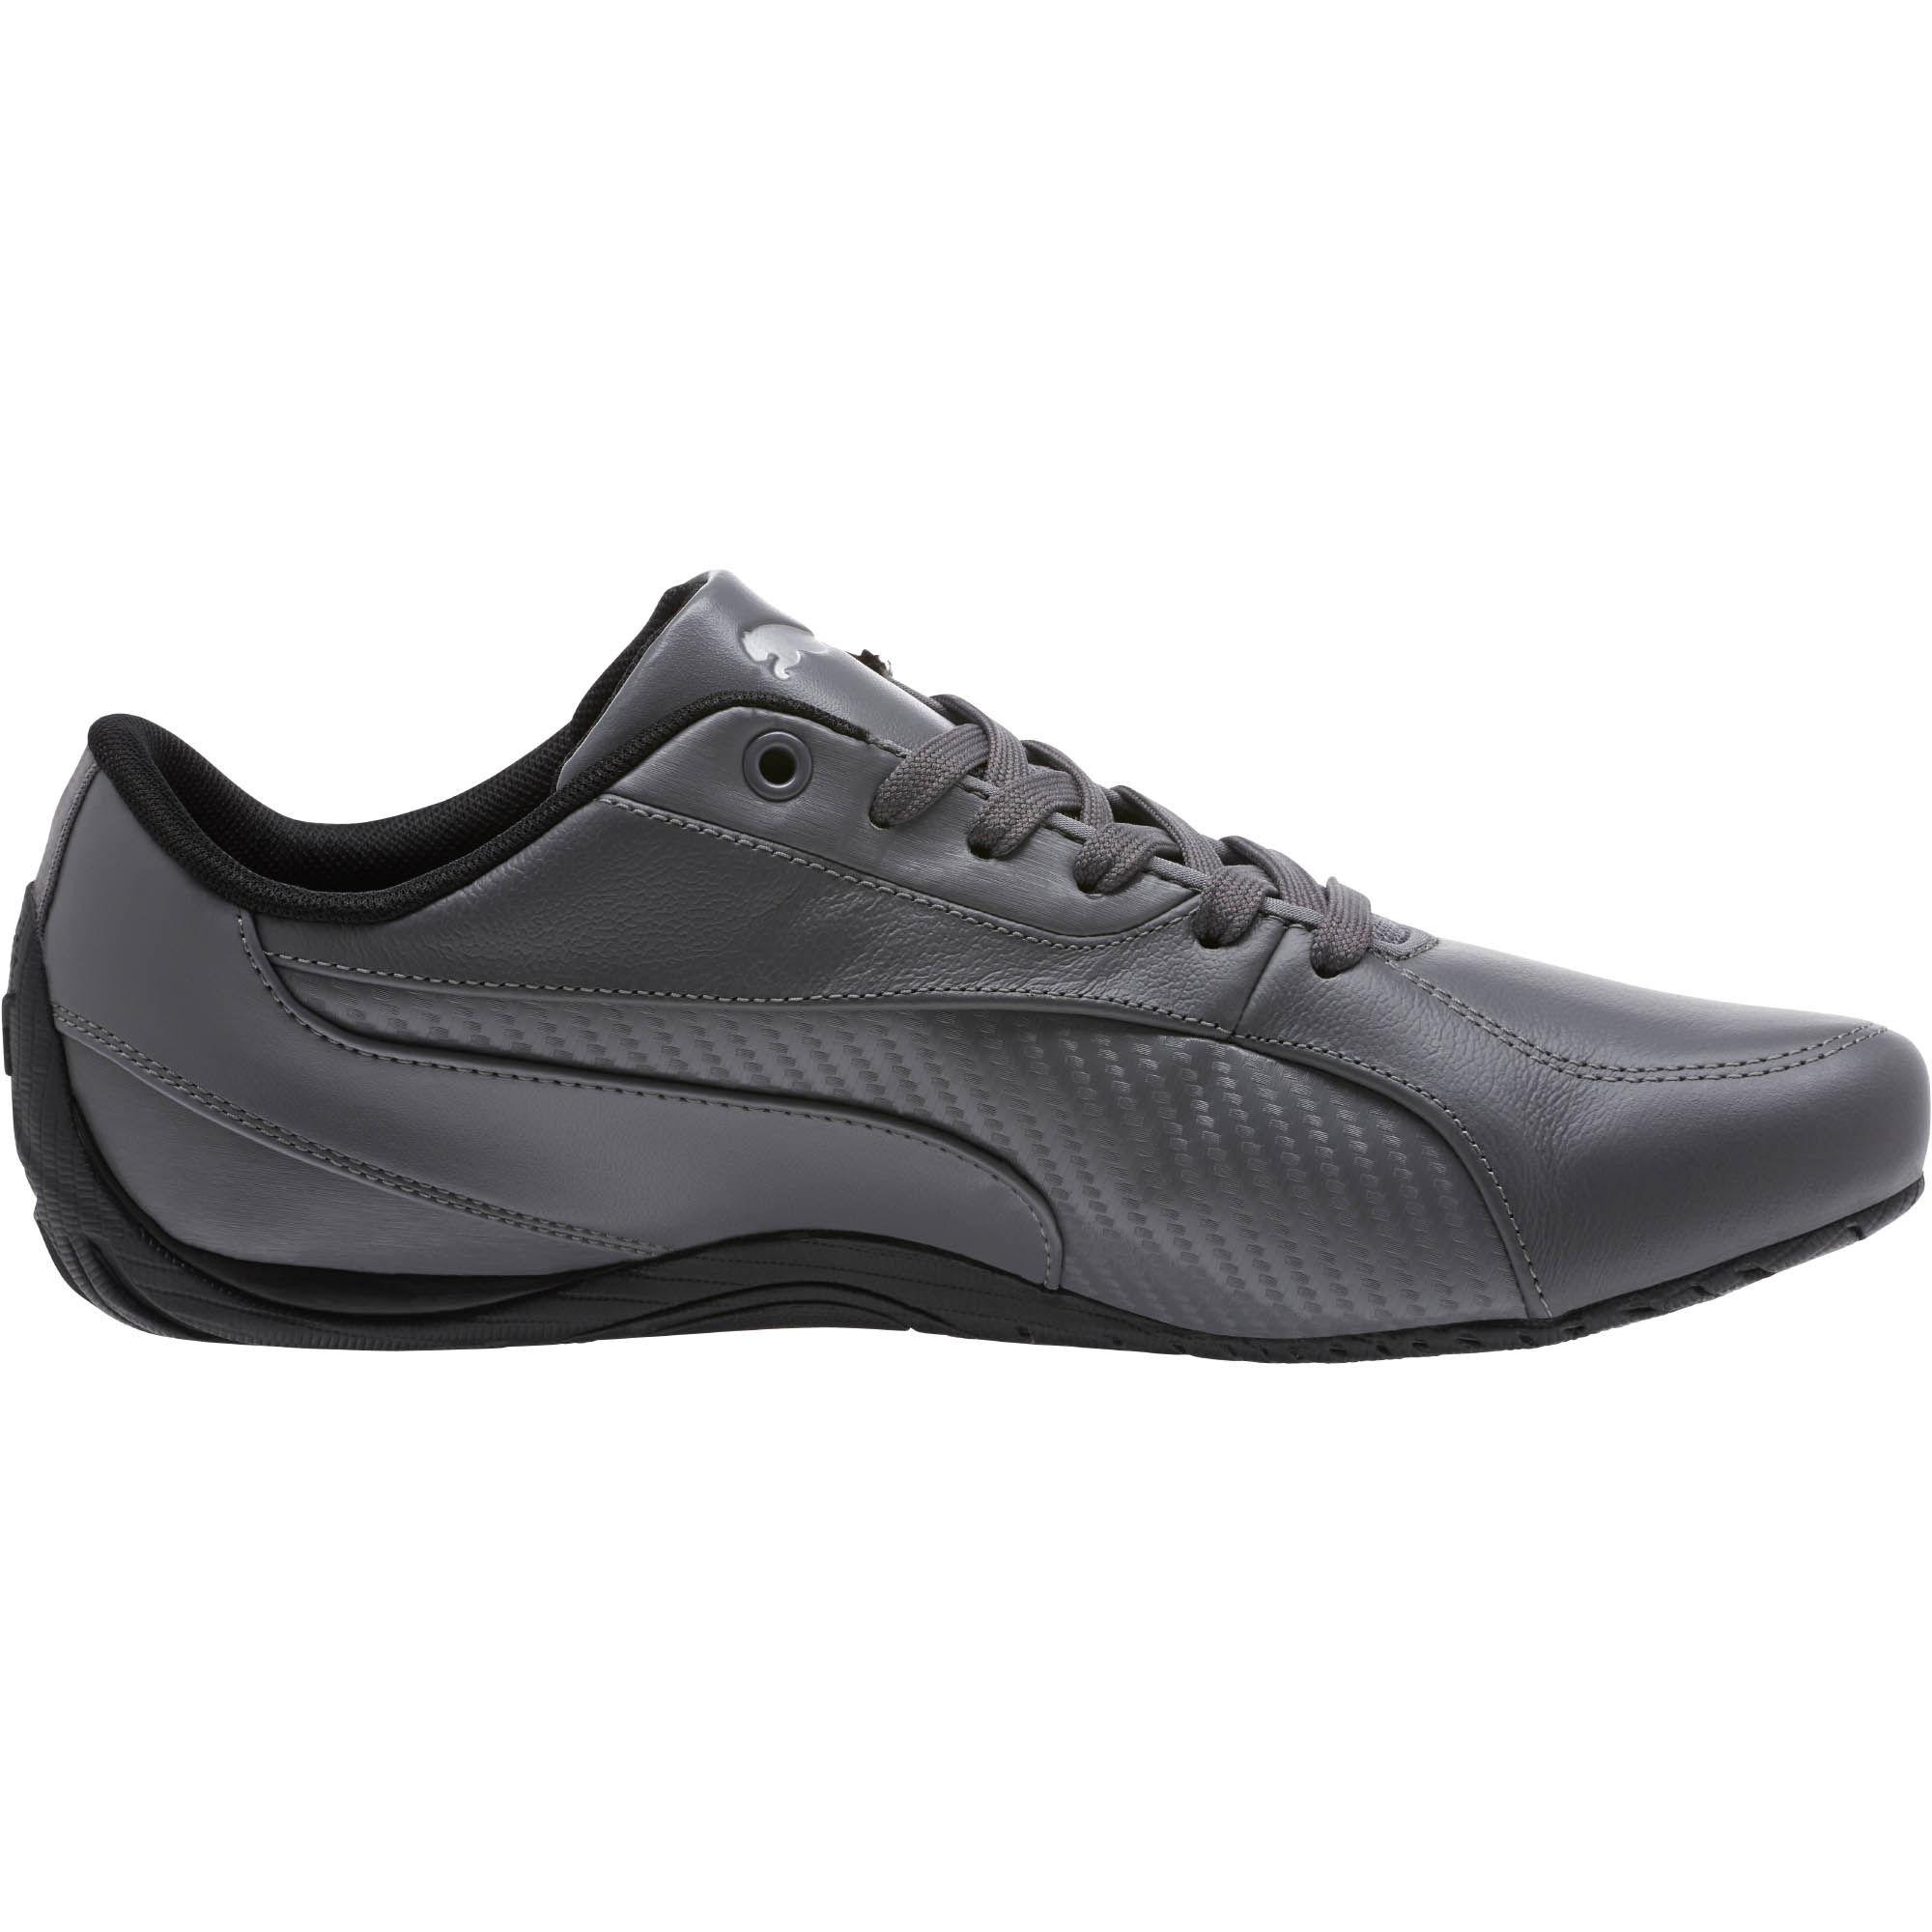 PUMA Lace Drift Cat 5 Carbon Fashion Sneaker in Steel Gray (Gray) for ...